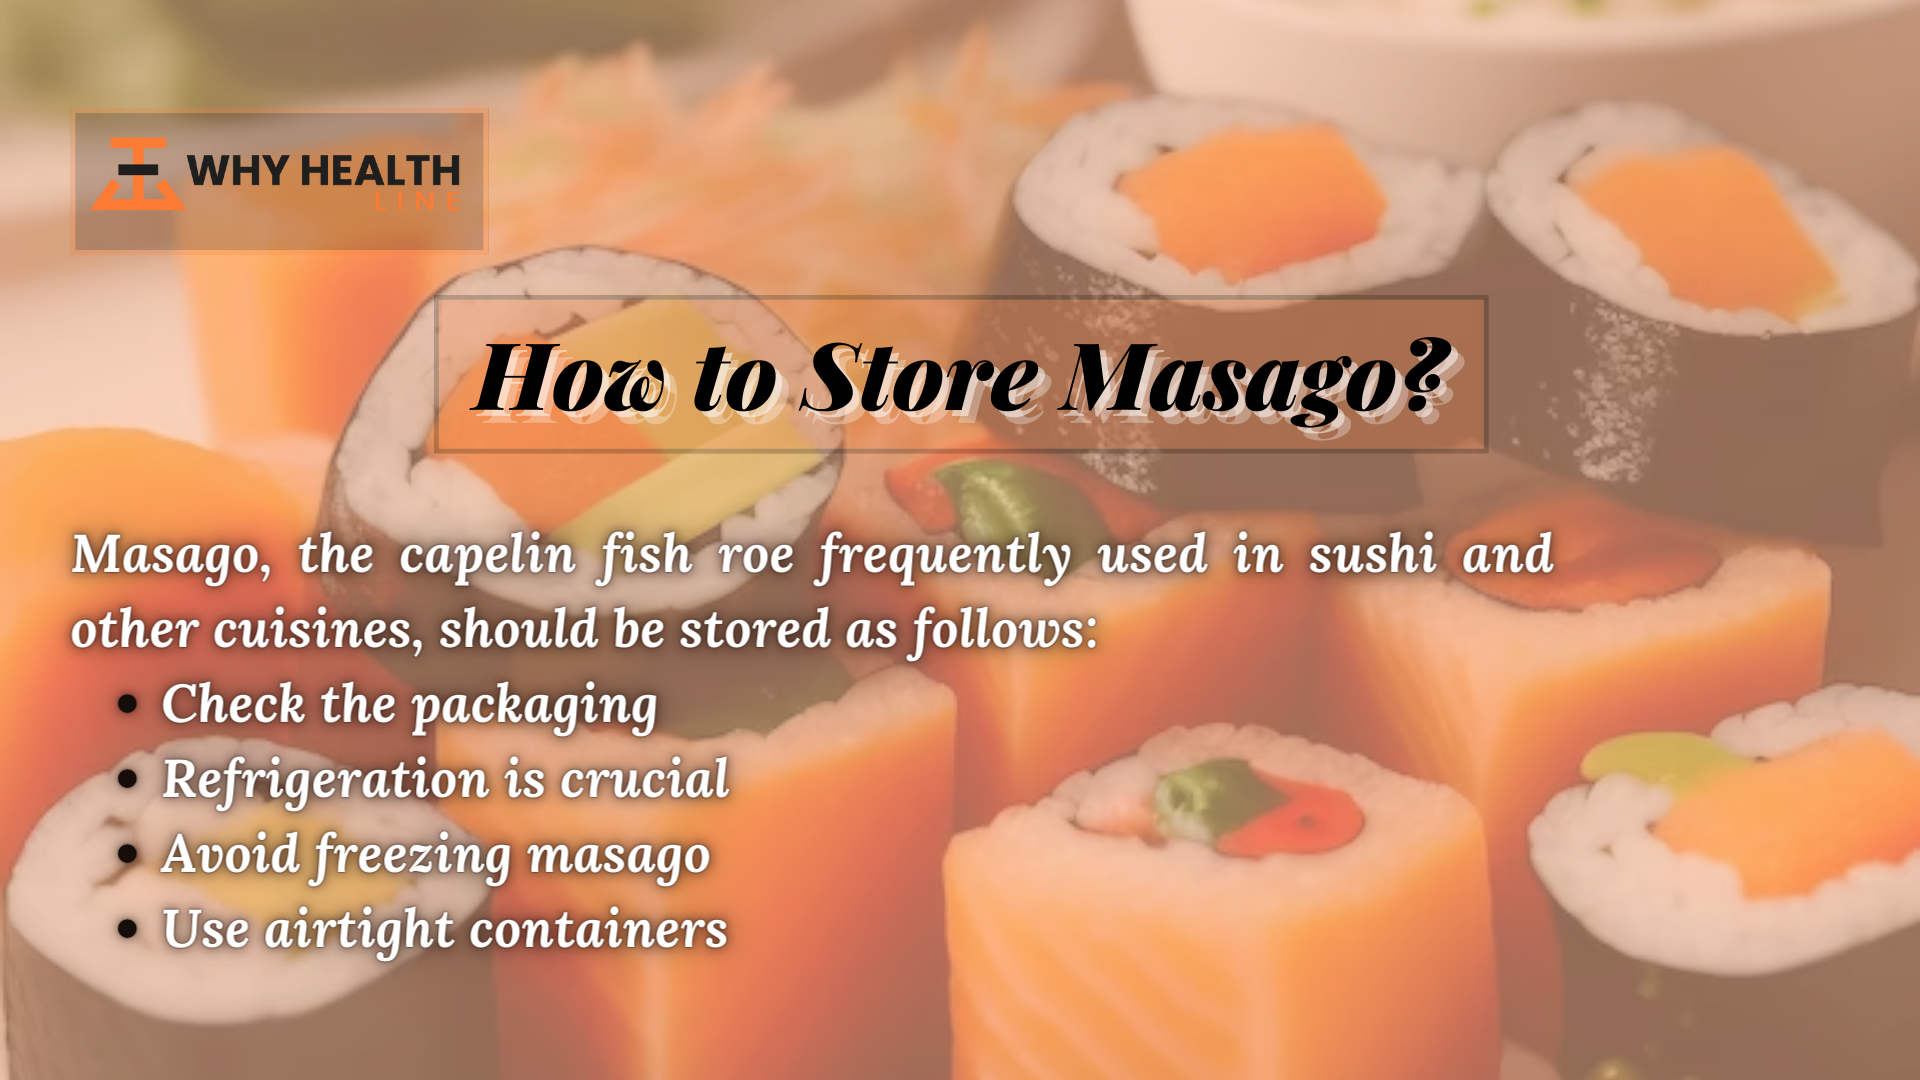 How to Store Masago?